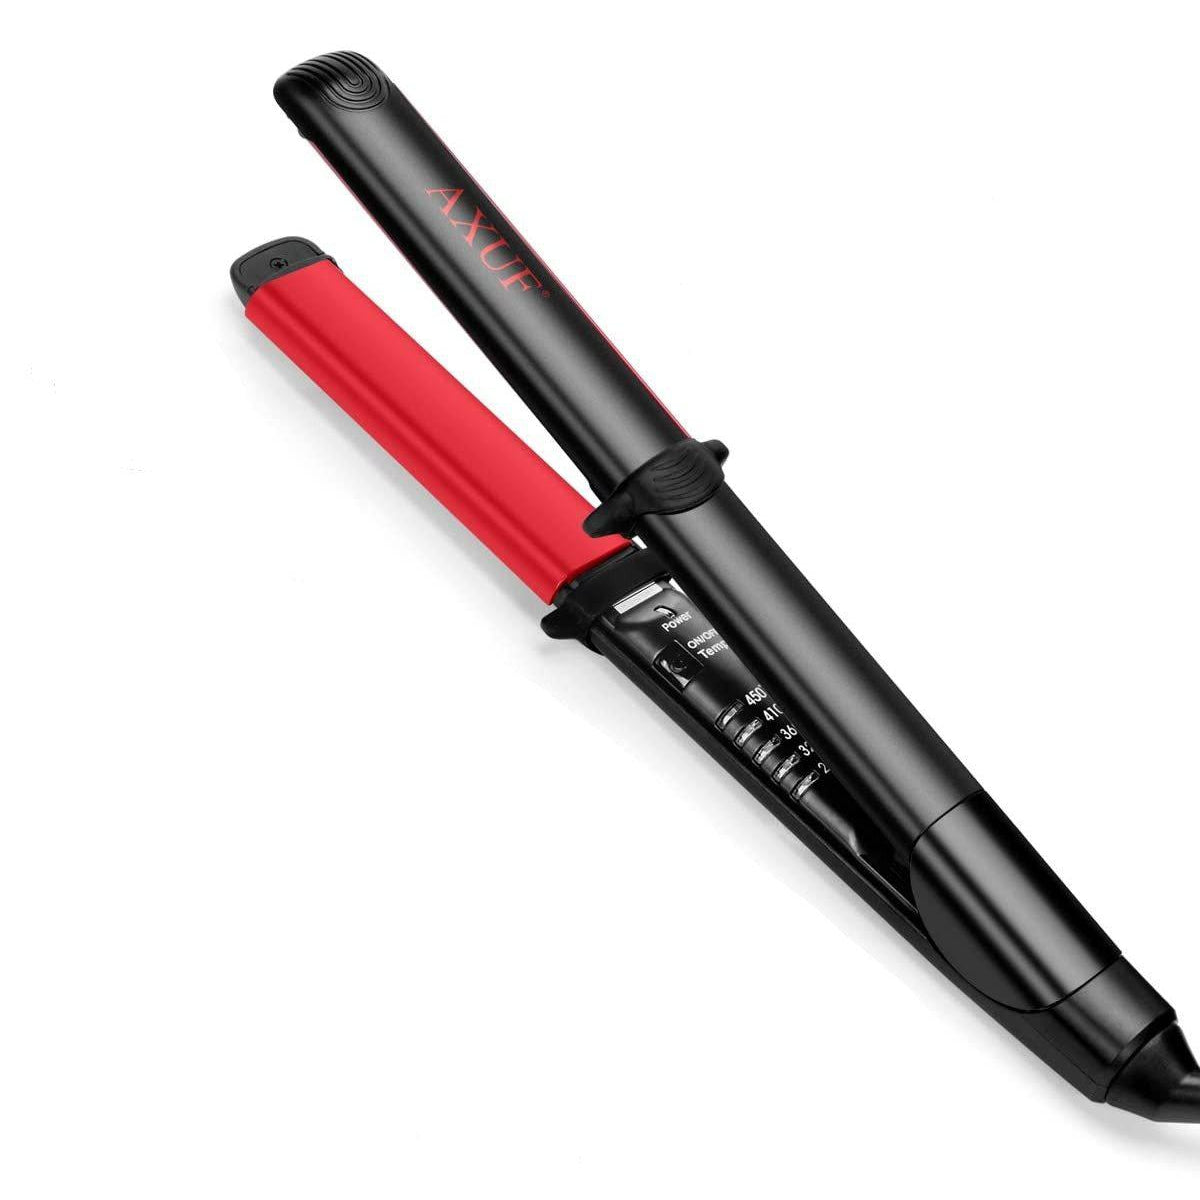 Axuf 2 in 1 Professional Hair Straightener and Curler in Titanium Ceramic Nano Tourmaline Flat Iron and For All Hair Types